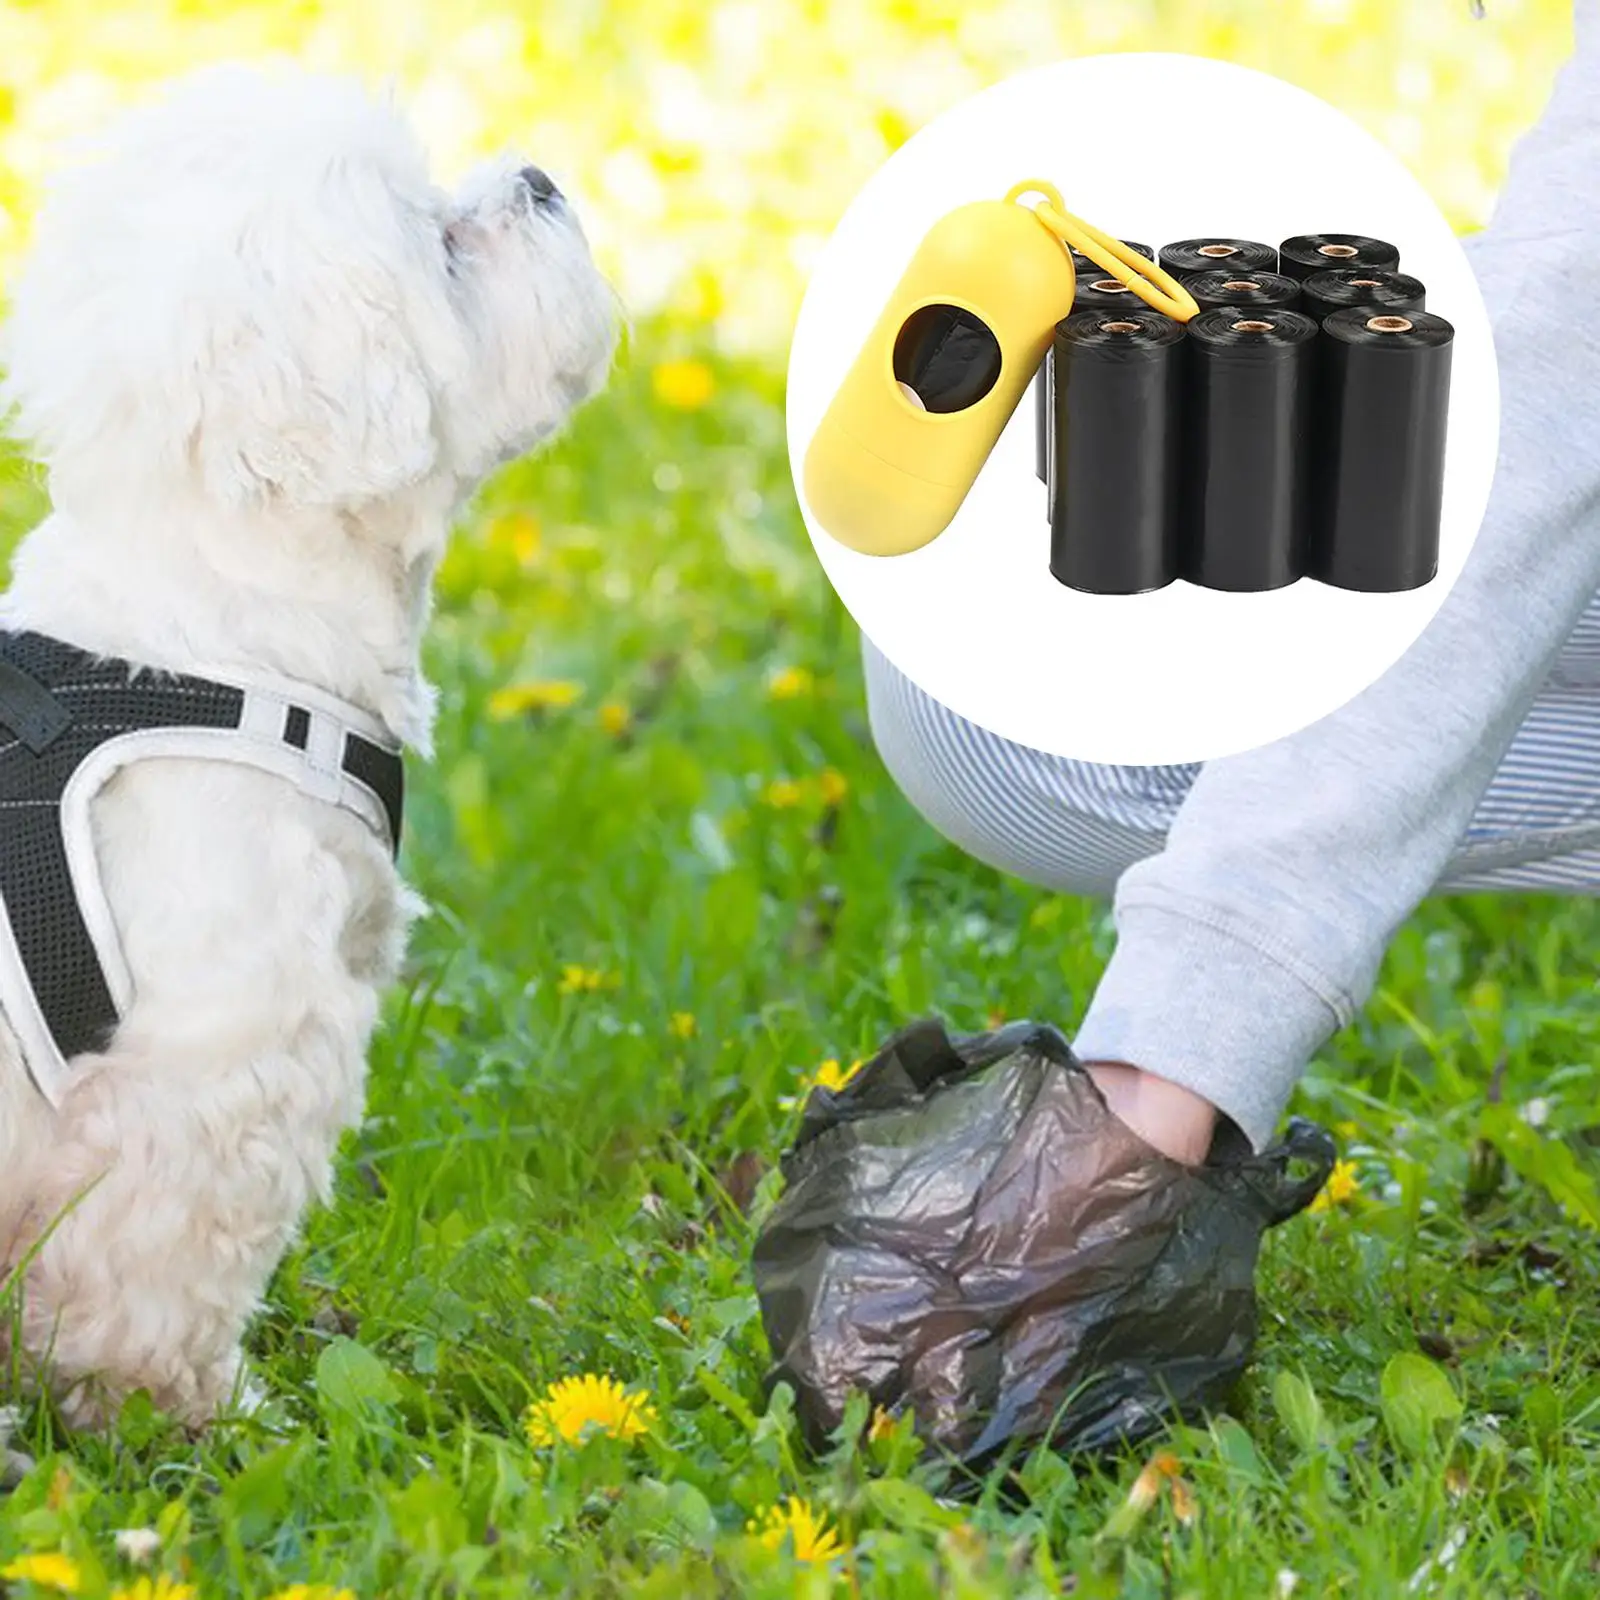 10x High Quality Dog Waste Bags No Leaks with Dispenser Supply Friendly Holder for Outdoor Pickups Travel Walking Backyard